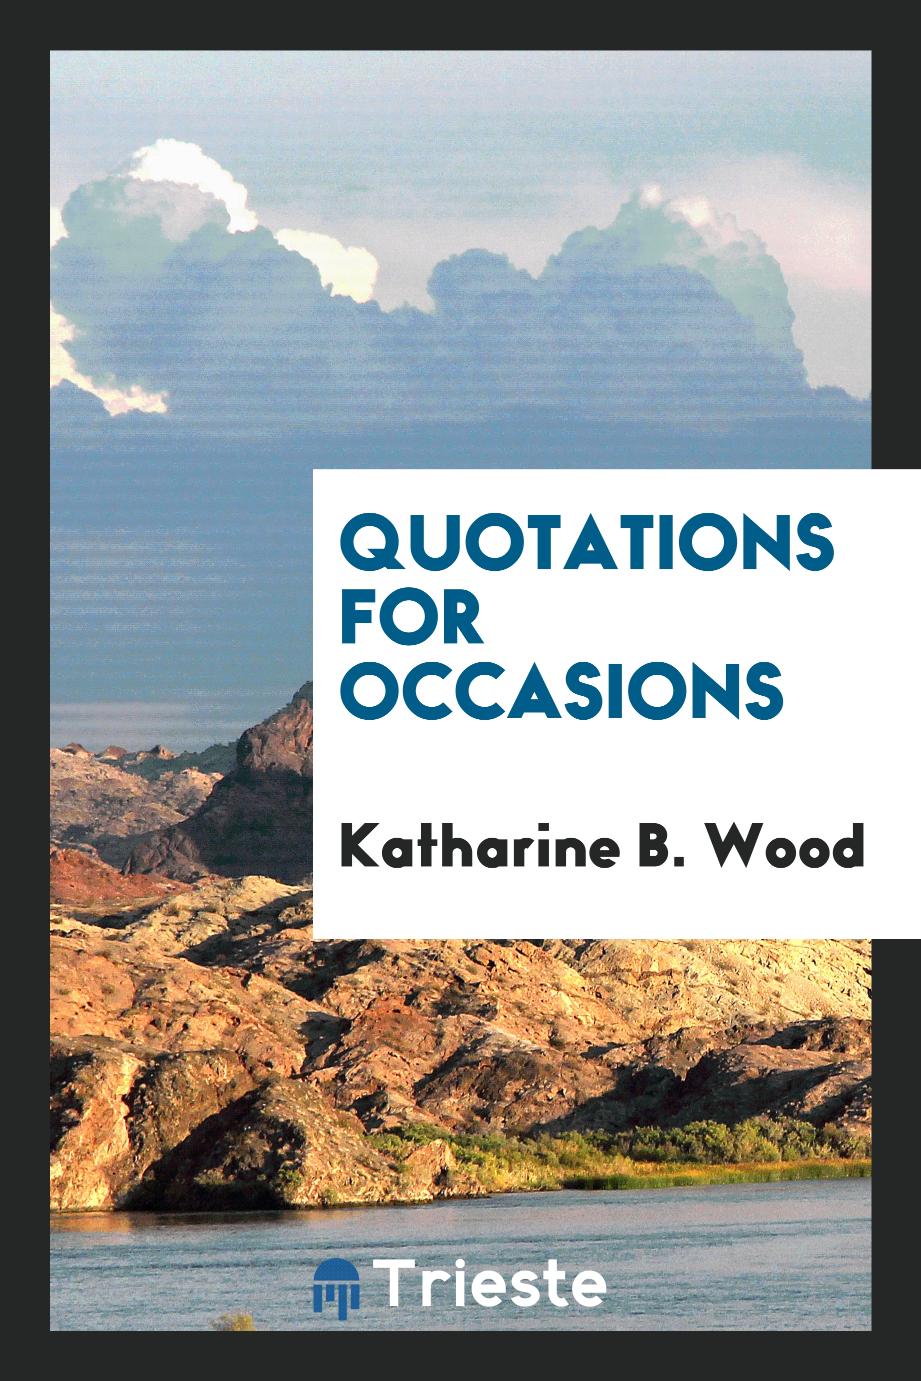 Quotations for occasions